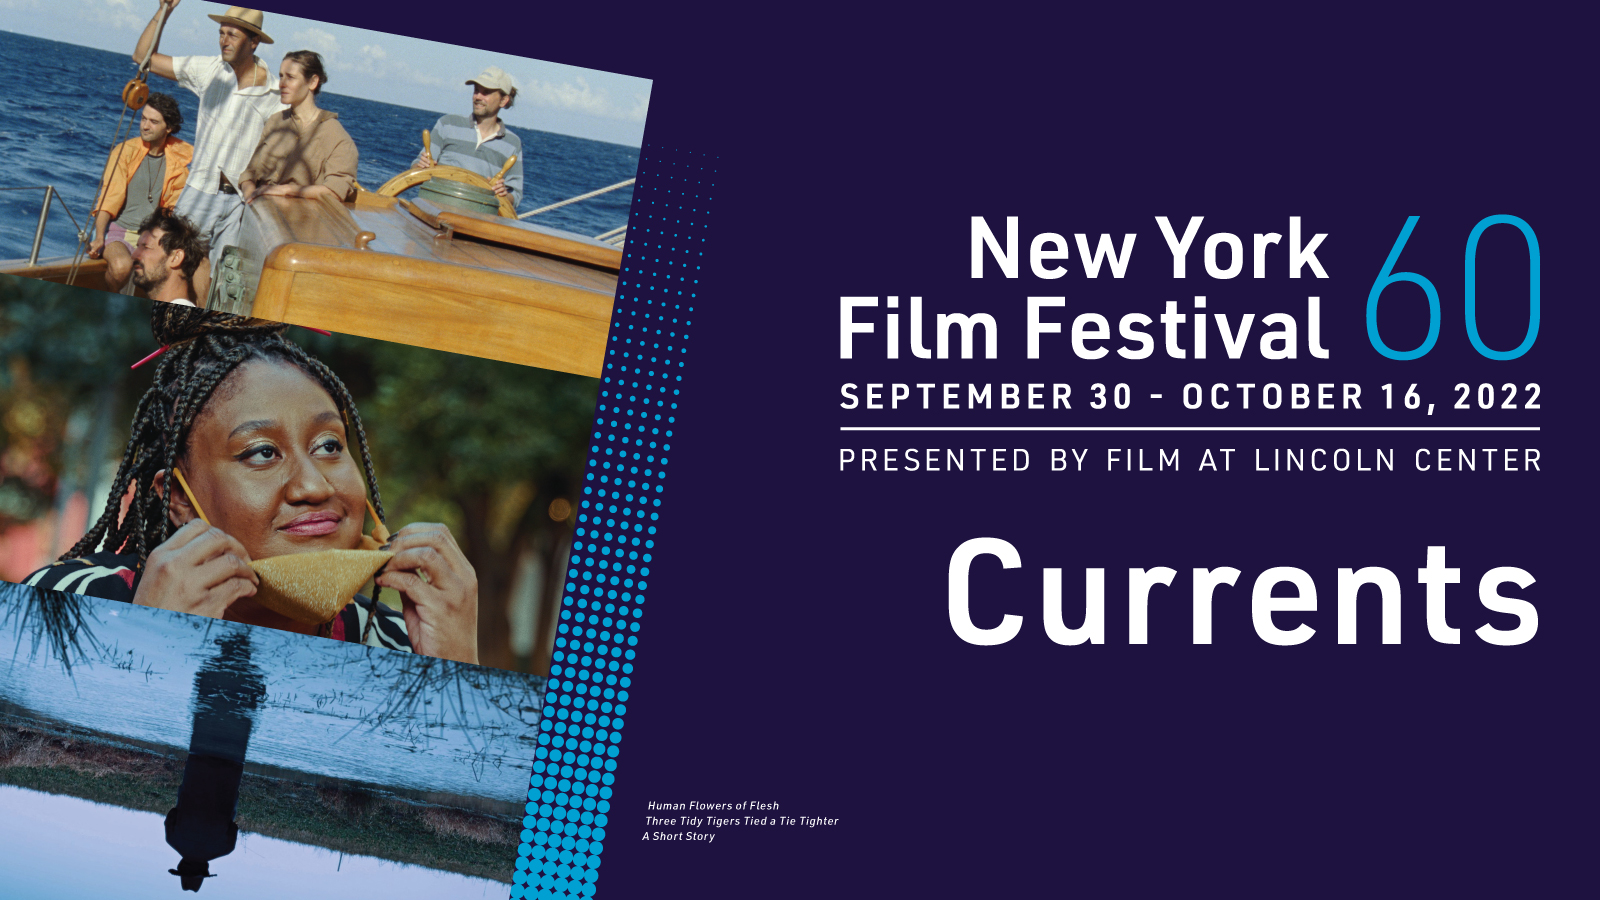 60th New York Film Festival Currents Announced